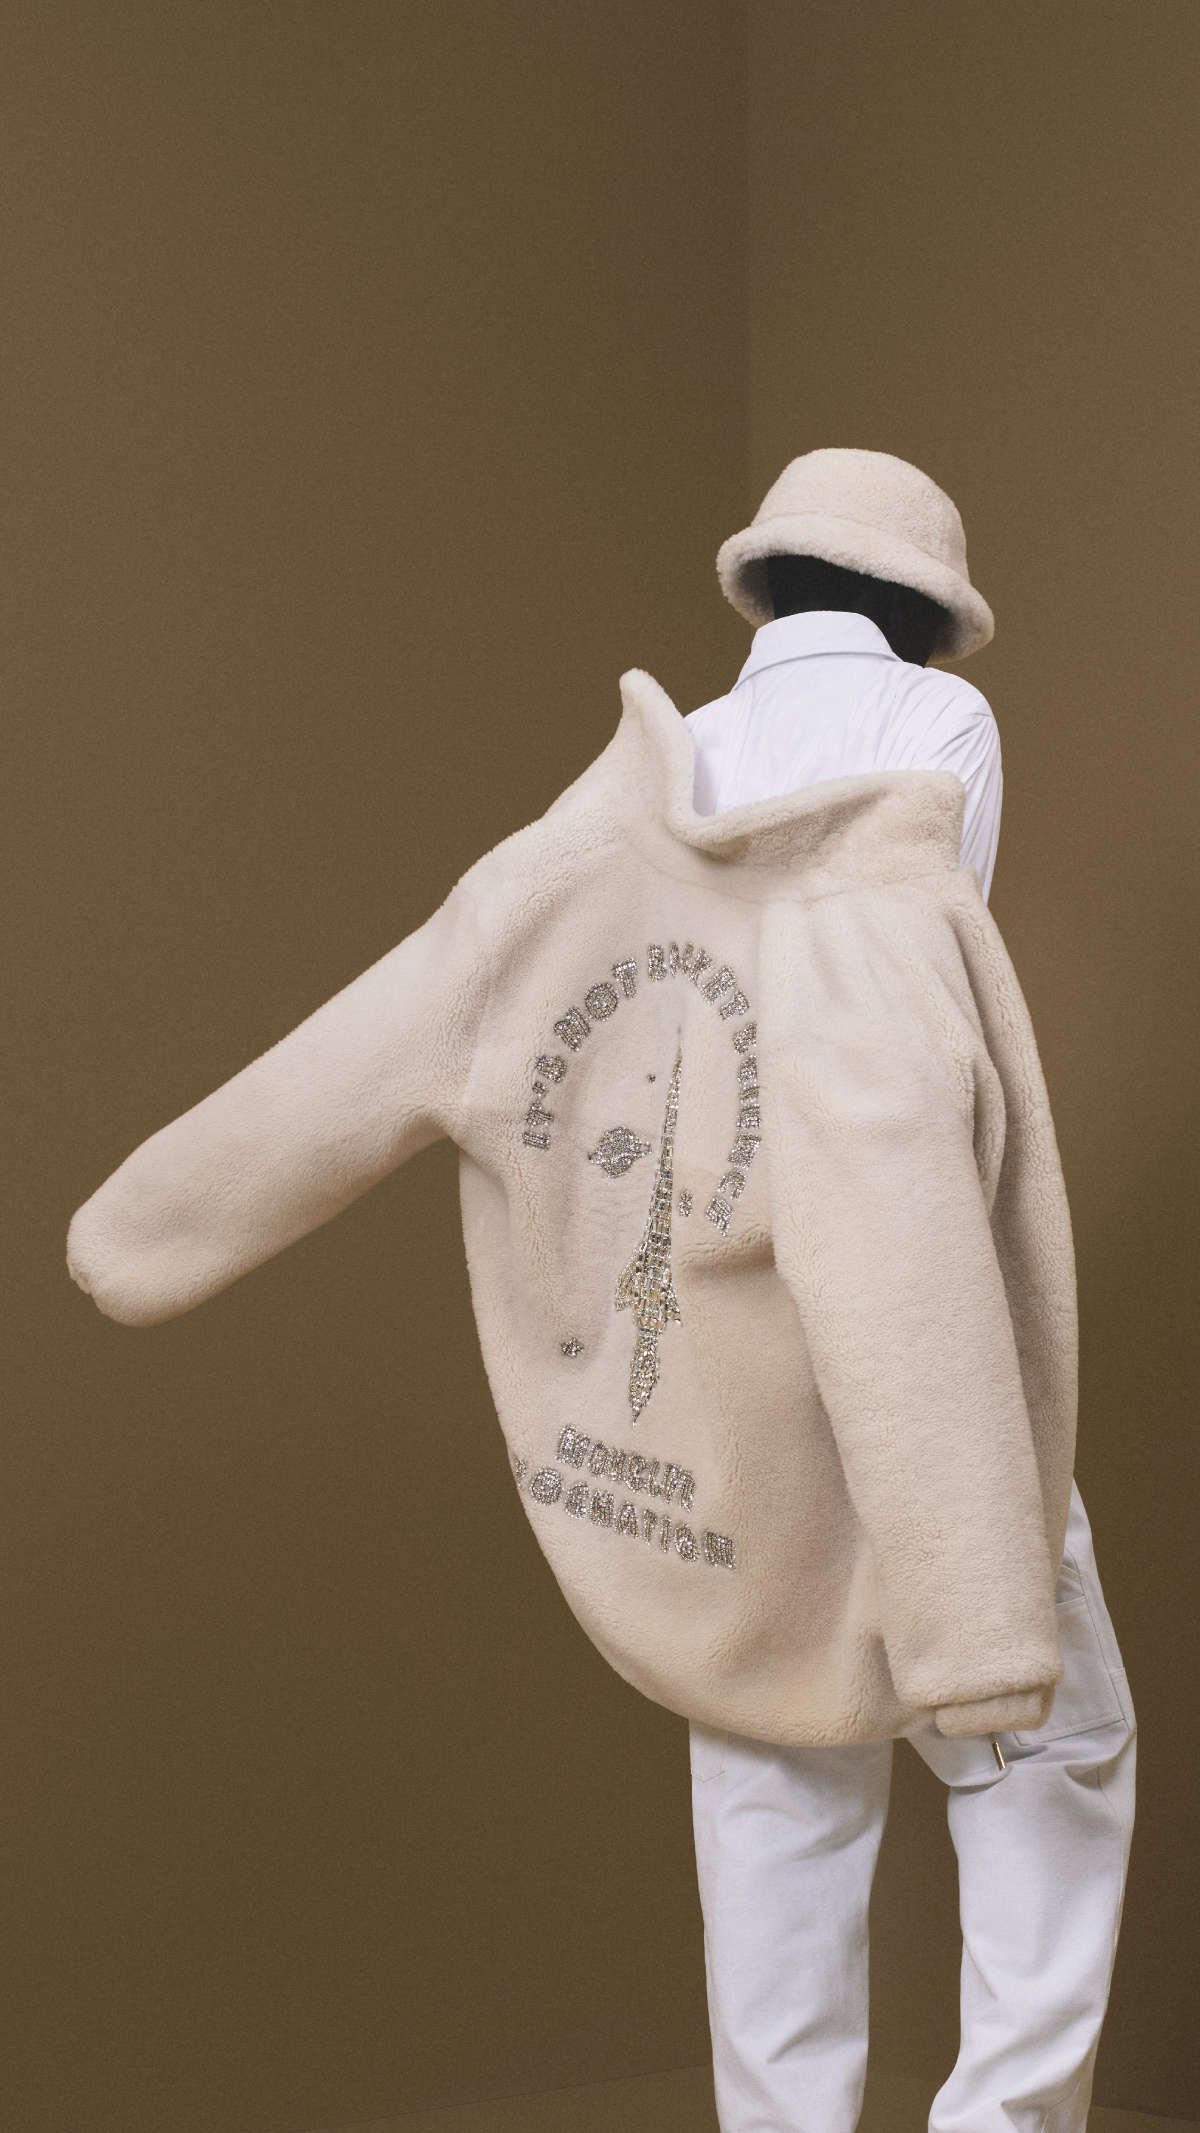 Moncler Genius Presents Its Latest Collection Designed By JAY-Z, In Partnership With Roc Nation